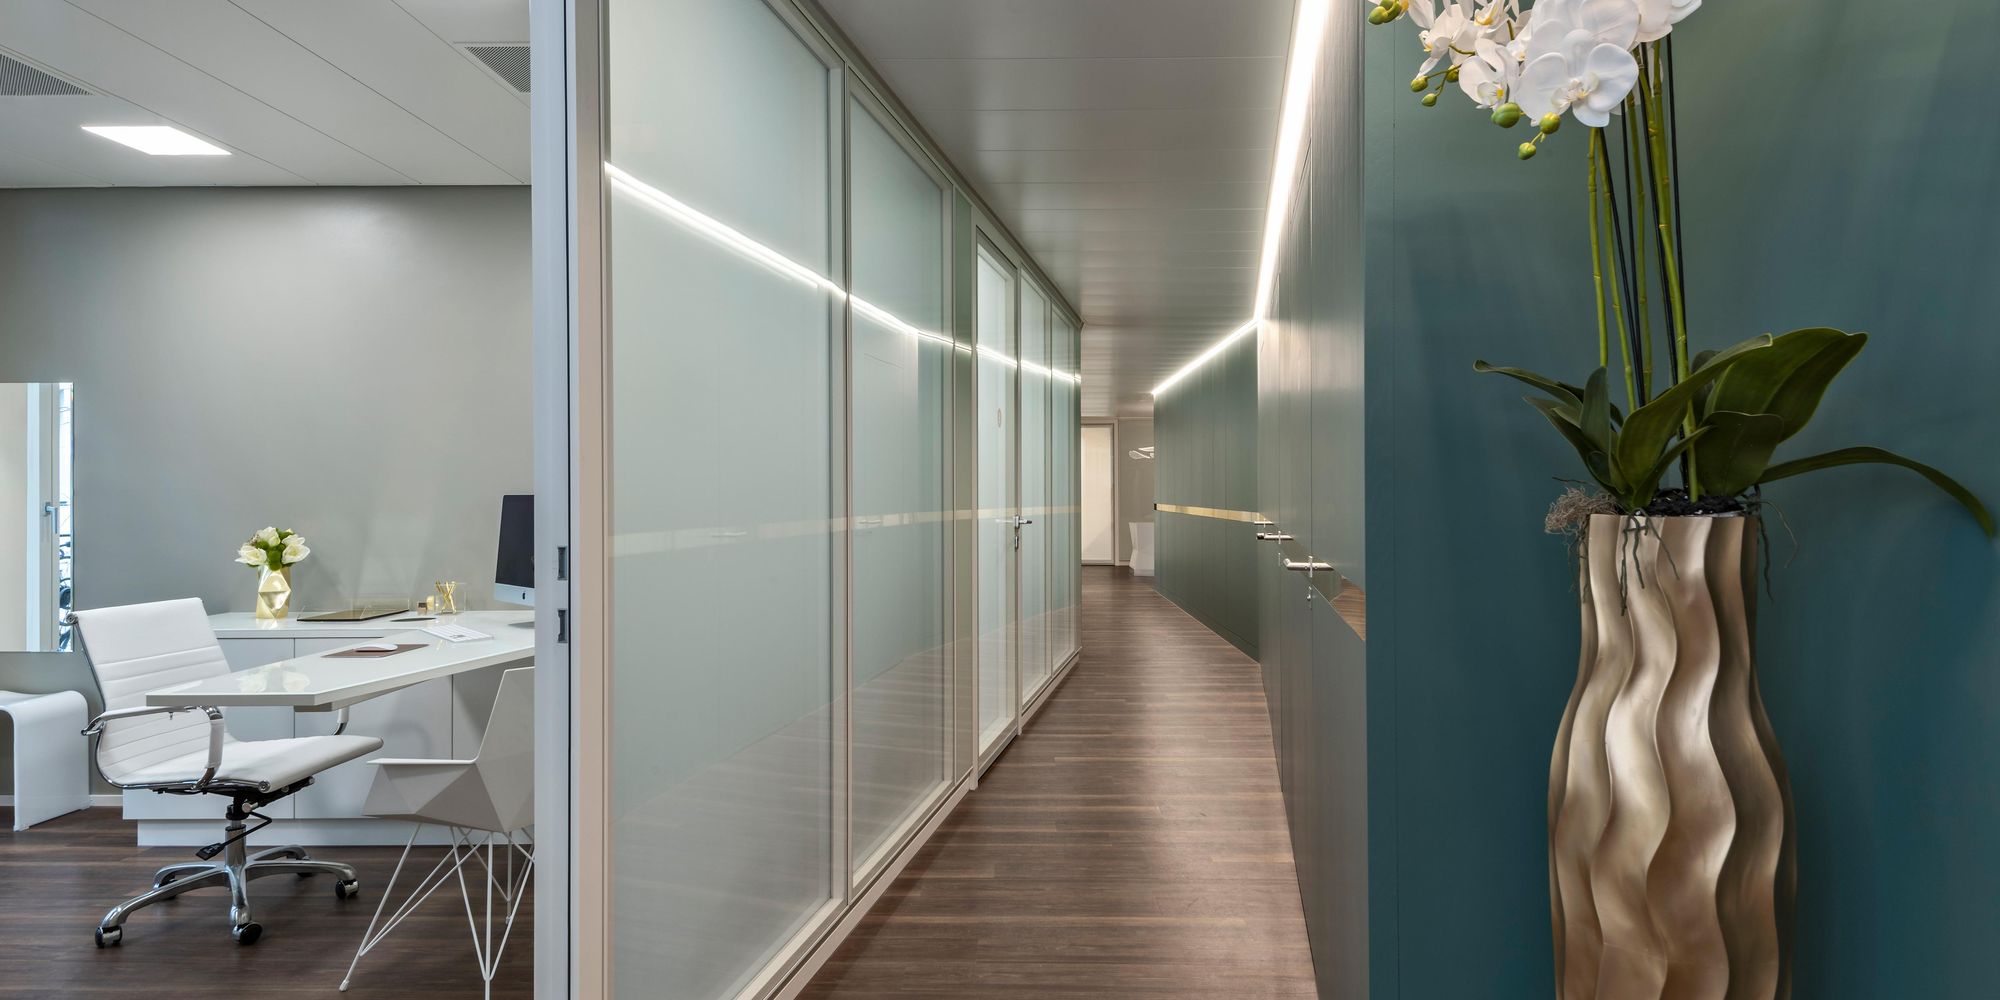 Examination room with switchable SmartGlass and corridor.